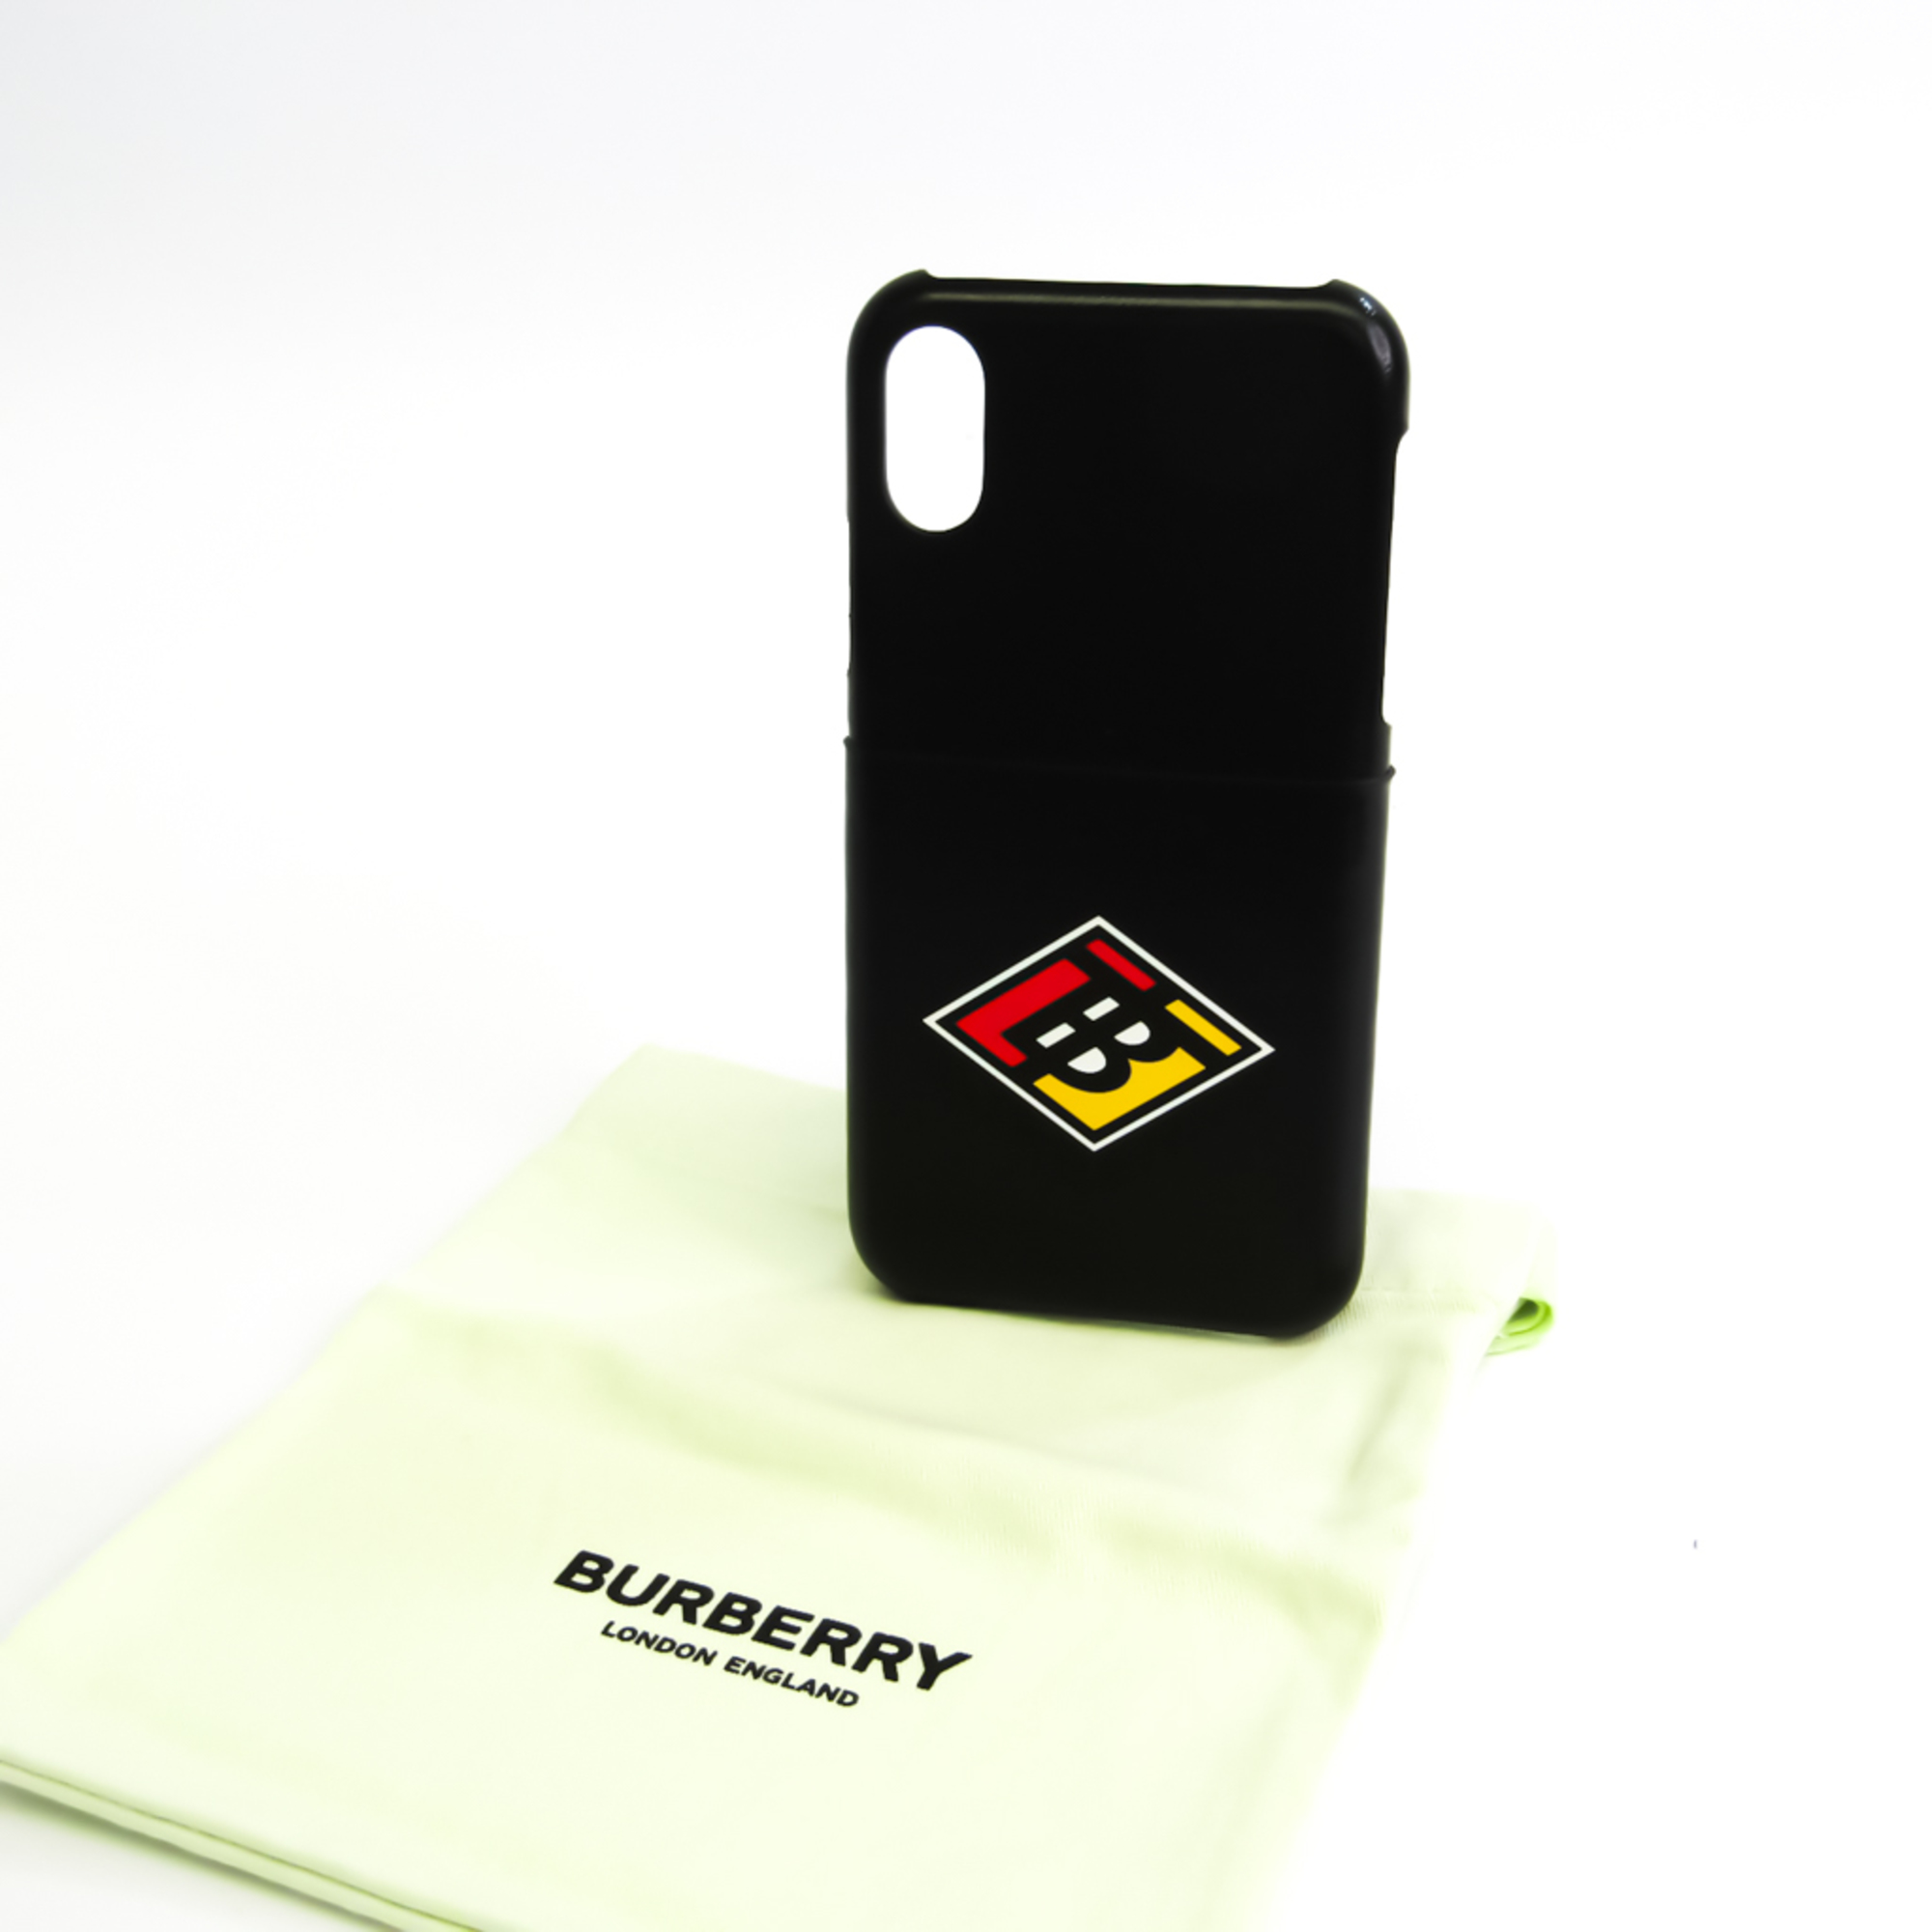 Burberry Leather Phone Bumper For IPhone X Black TB coin logo 8021771